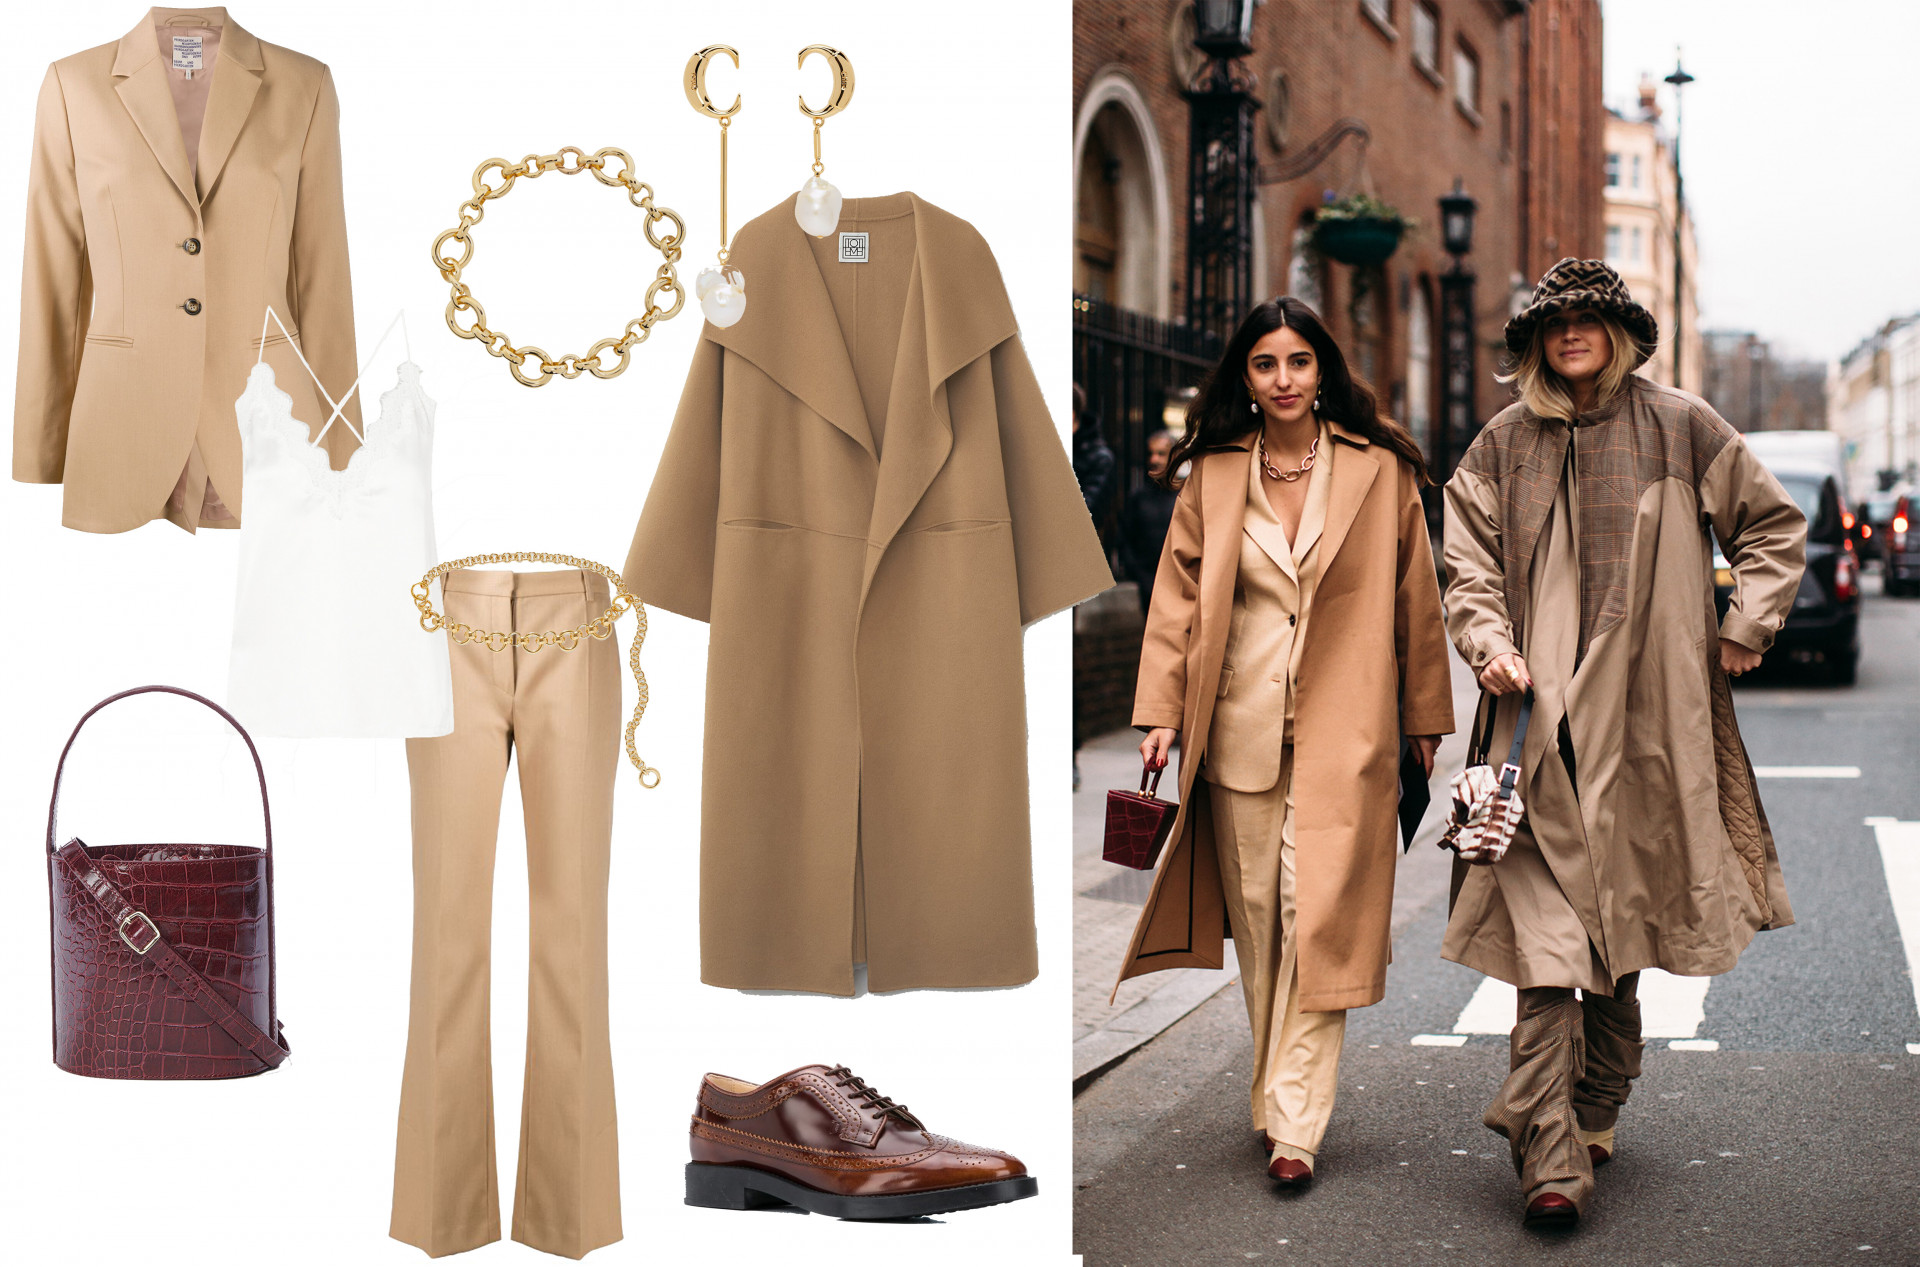 GET THE LOOK: It's Layering Season, How to Bundle Up Without